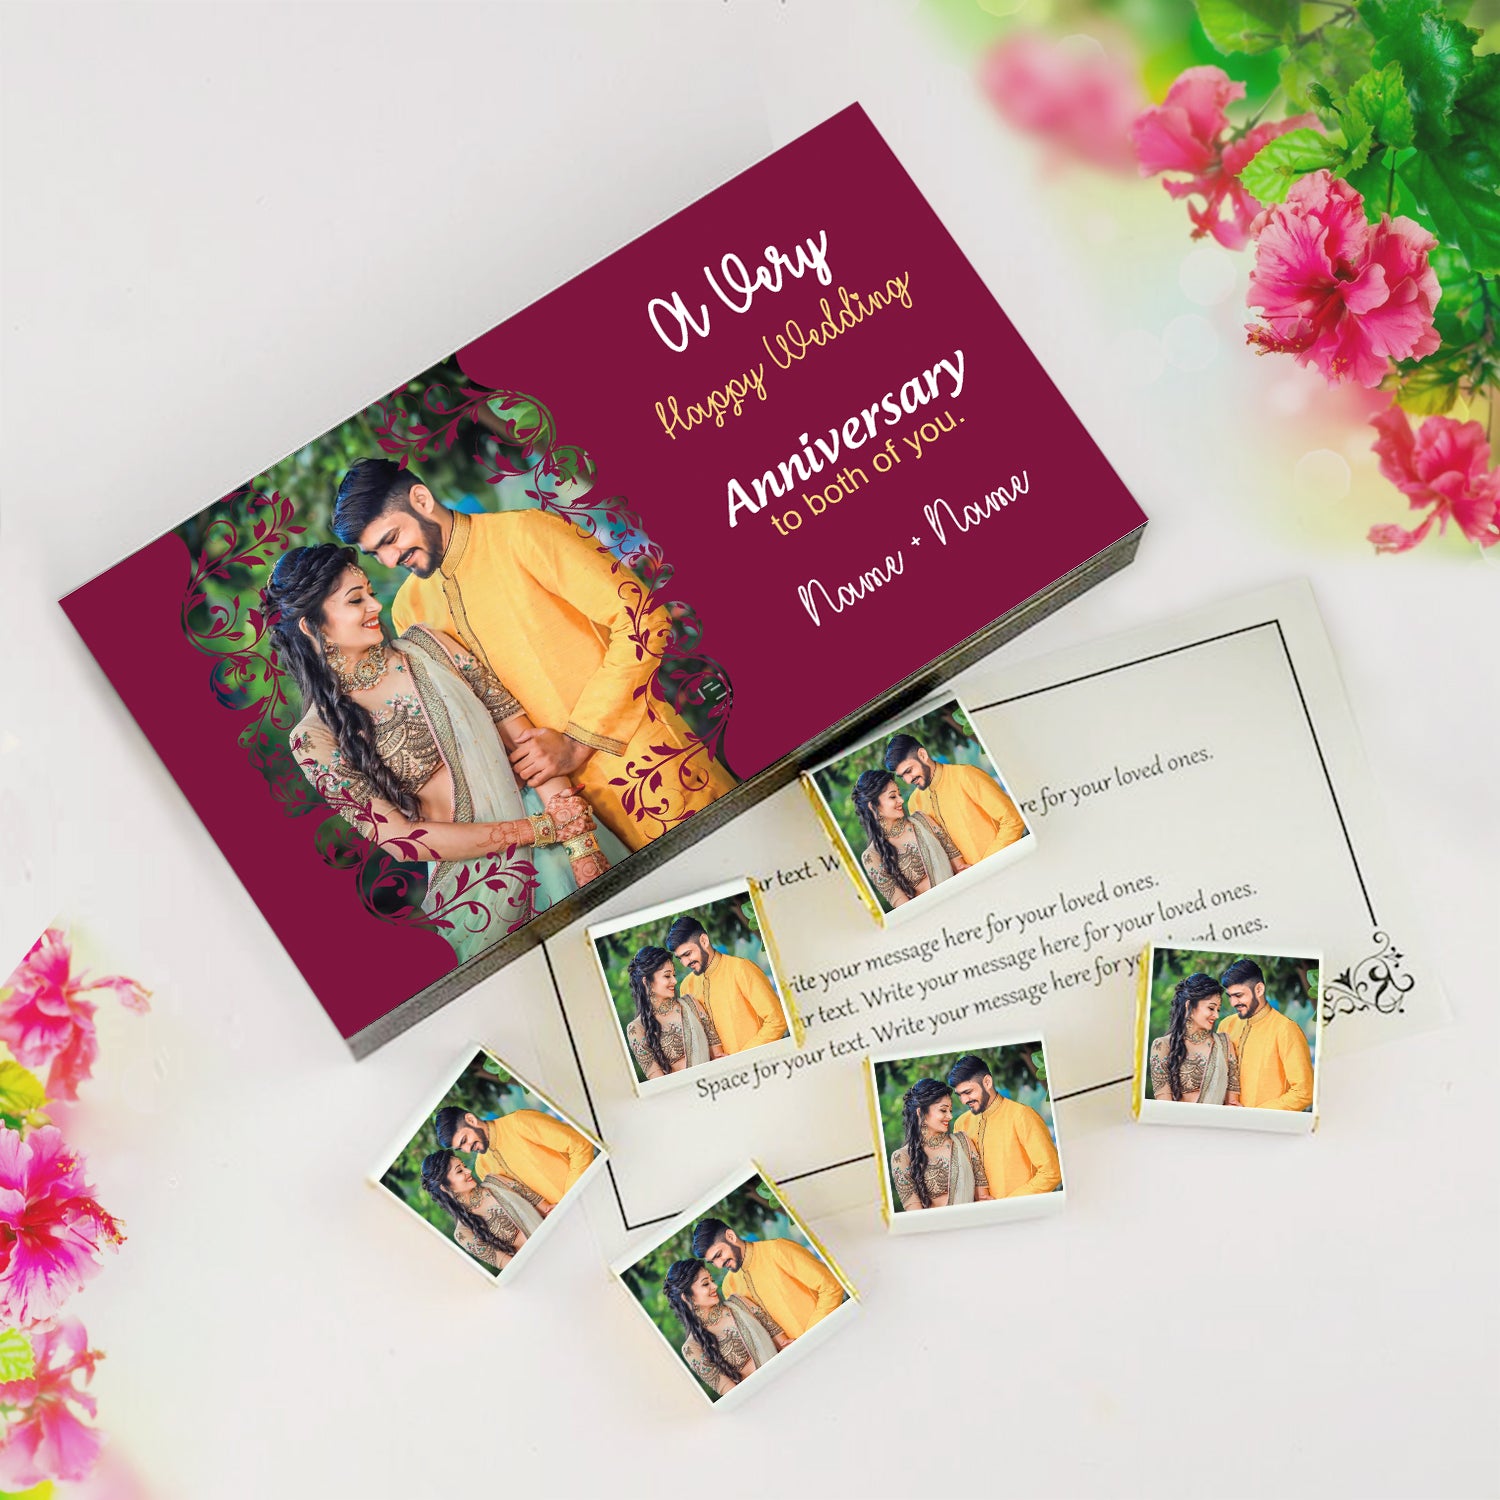 customized photo gifts of Wrapper printed chocolates on the occasion of a wedding anniversary. Everyone loves chocolates!